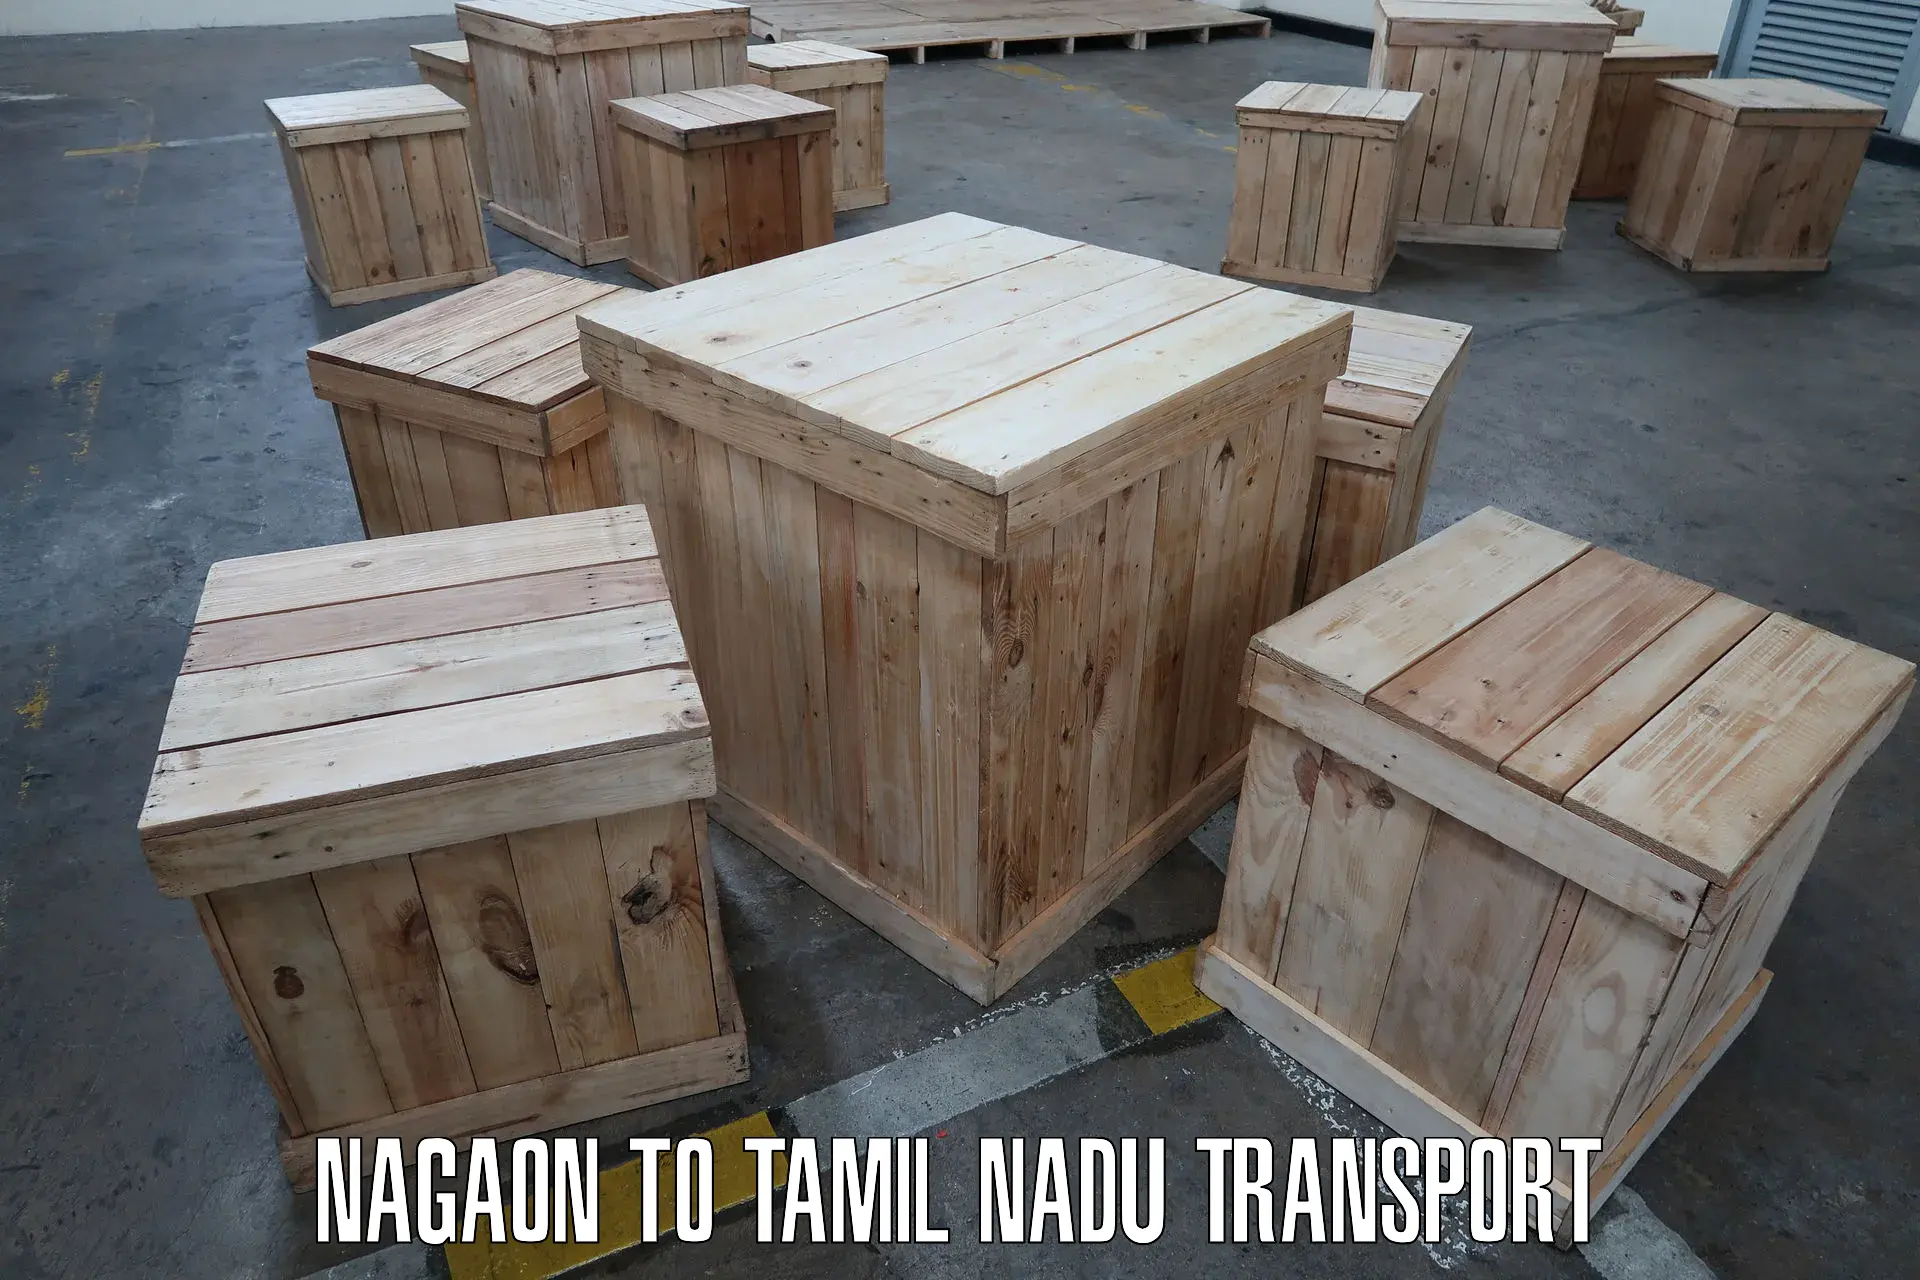 Air freight transport services Nagaon to Cuddalore